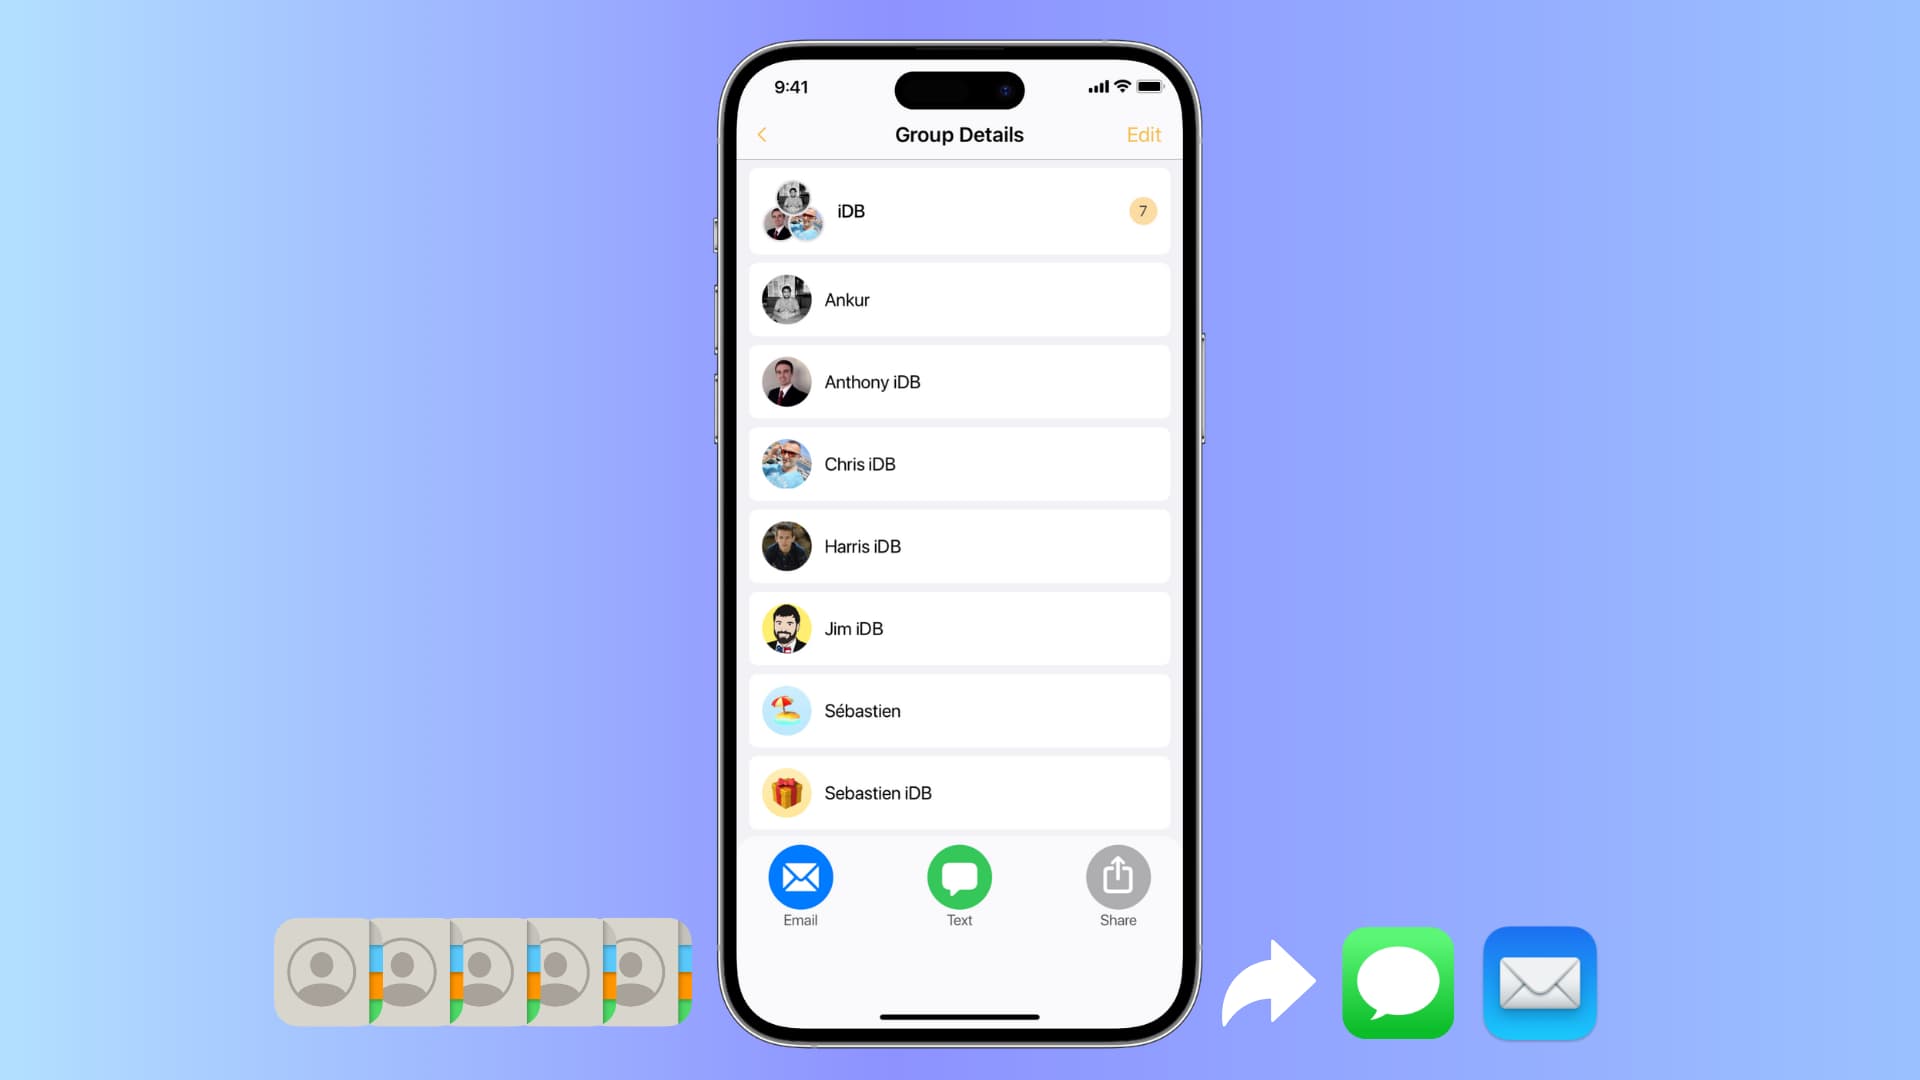 Share a group of contacts from your iPhone